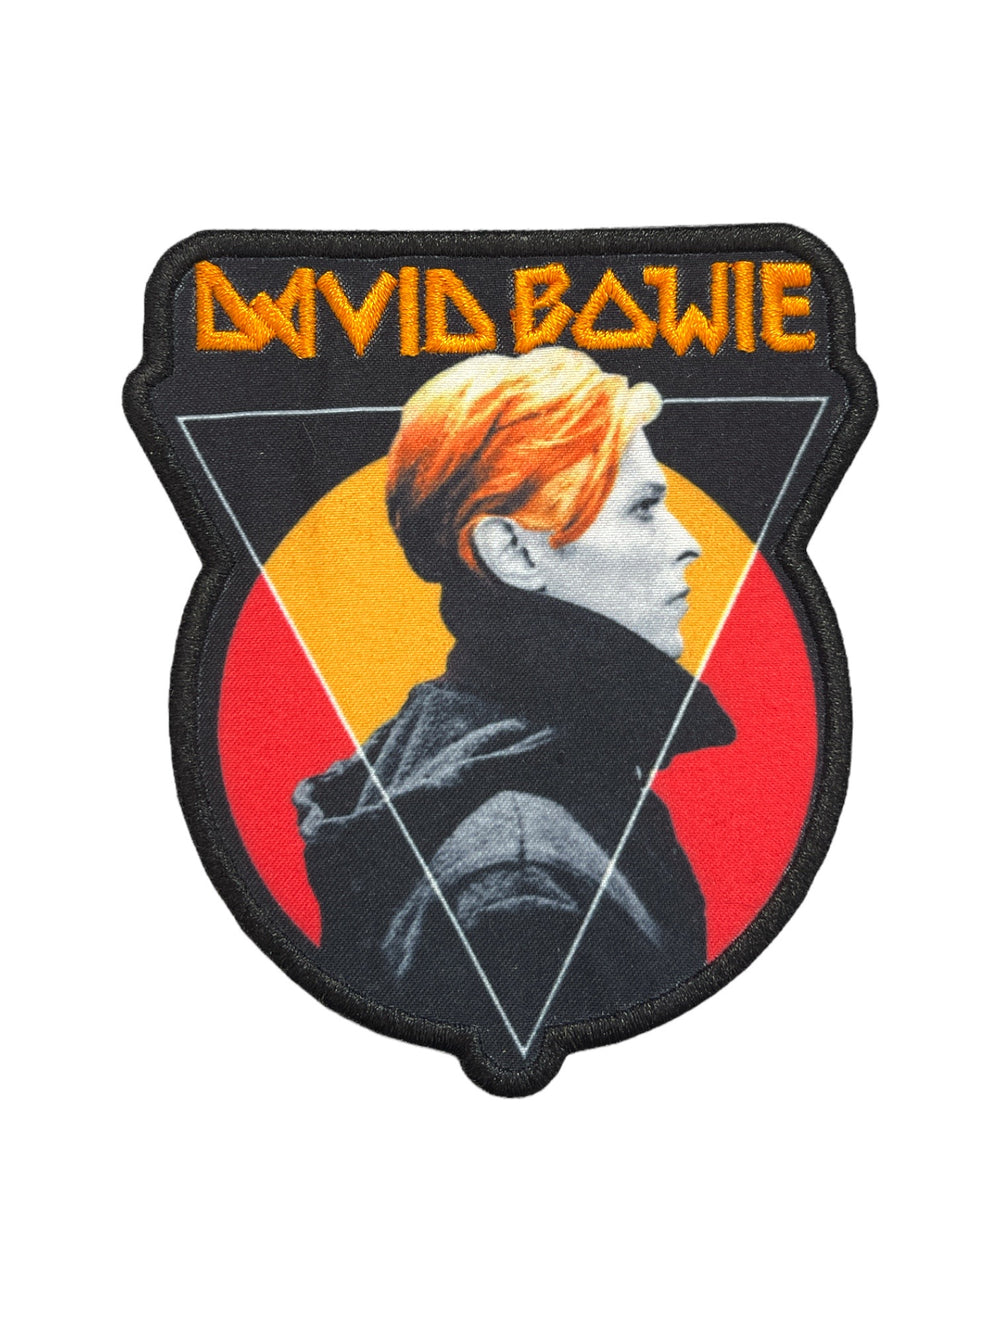 David Bowie Low Official Woven Patch Brand New